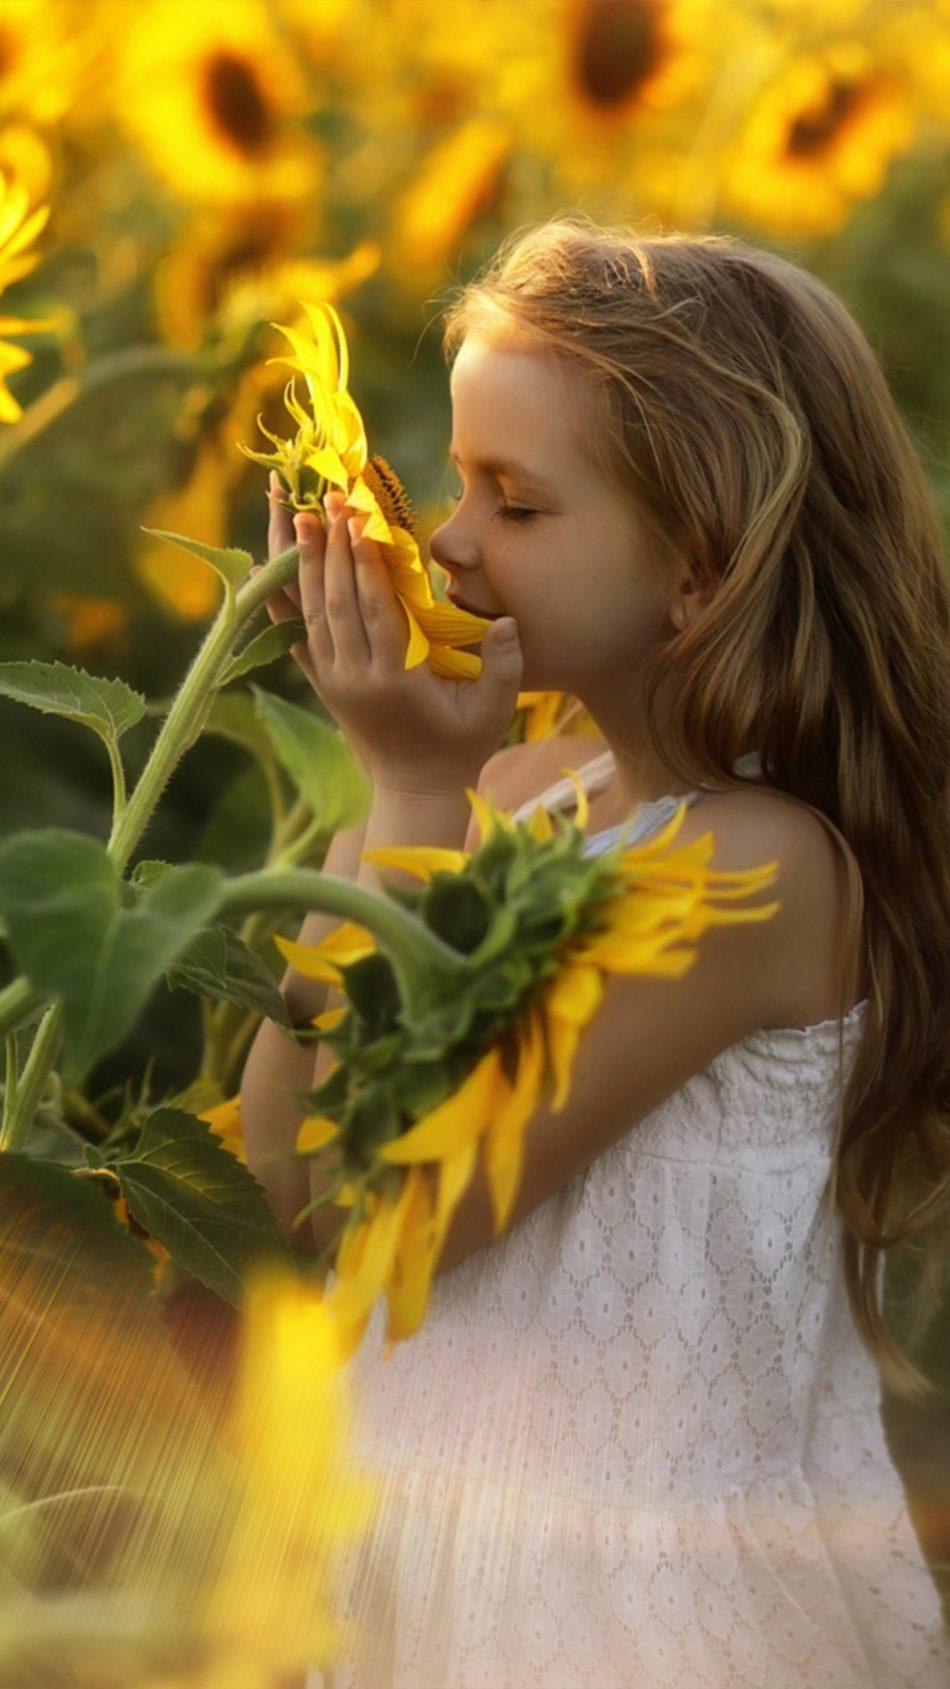 Download Child Relax Sunflowers Morning Free Pure 4K Ultra